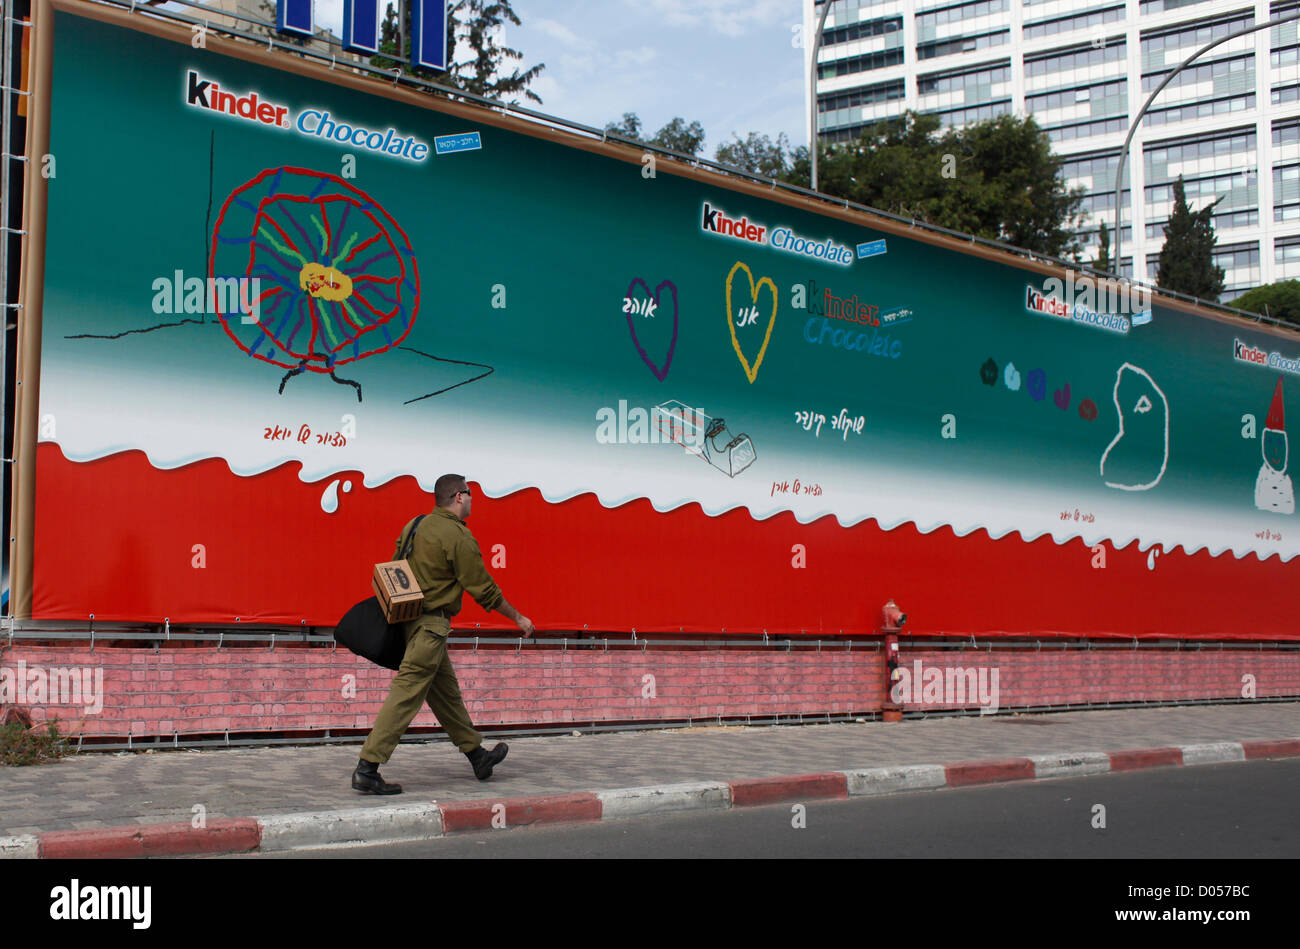 An Israeli reservist soldier carrying a gas mask box walks past an advertisement billboard advertising Kinder Chocolate in downtown Tel Aviv Israel Stock Photo